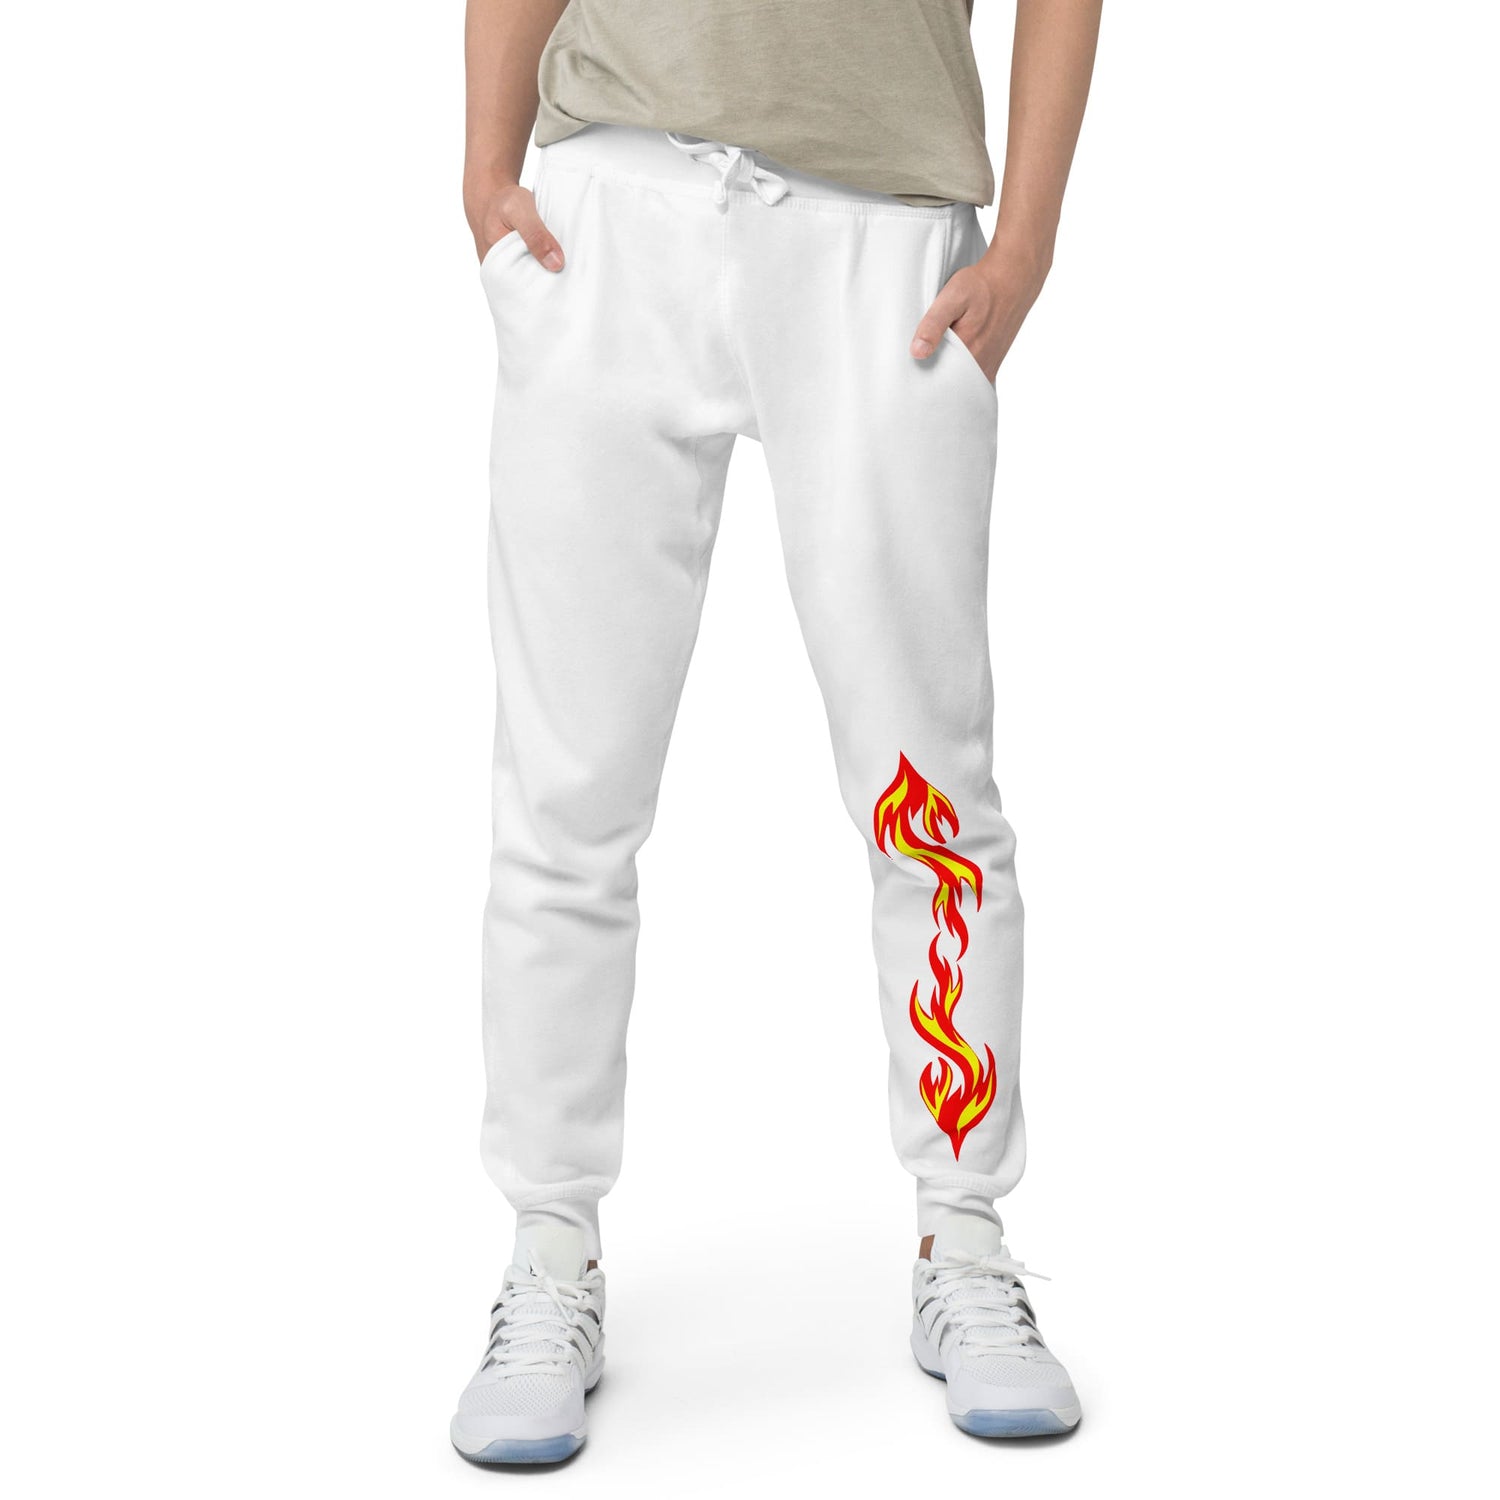 sweatpants-pants-shorts-wide-leg-pants-track-pants-and-shorts-collection-at-oneowlartist